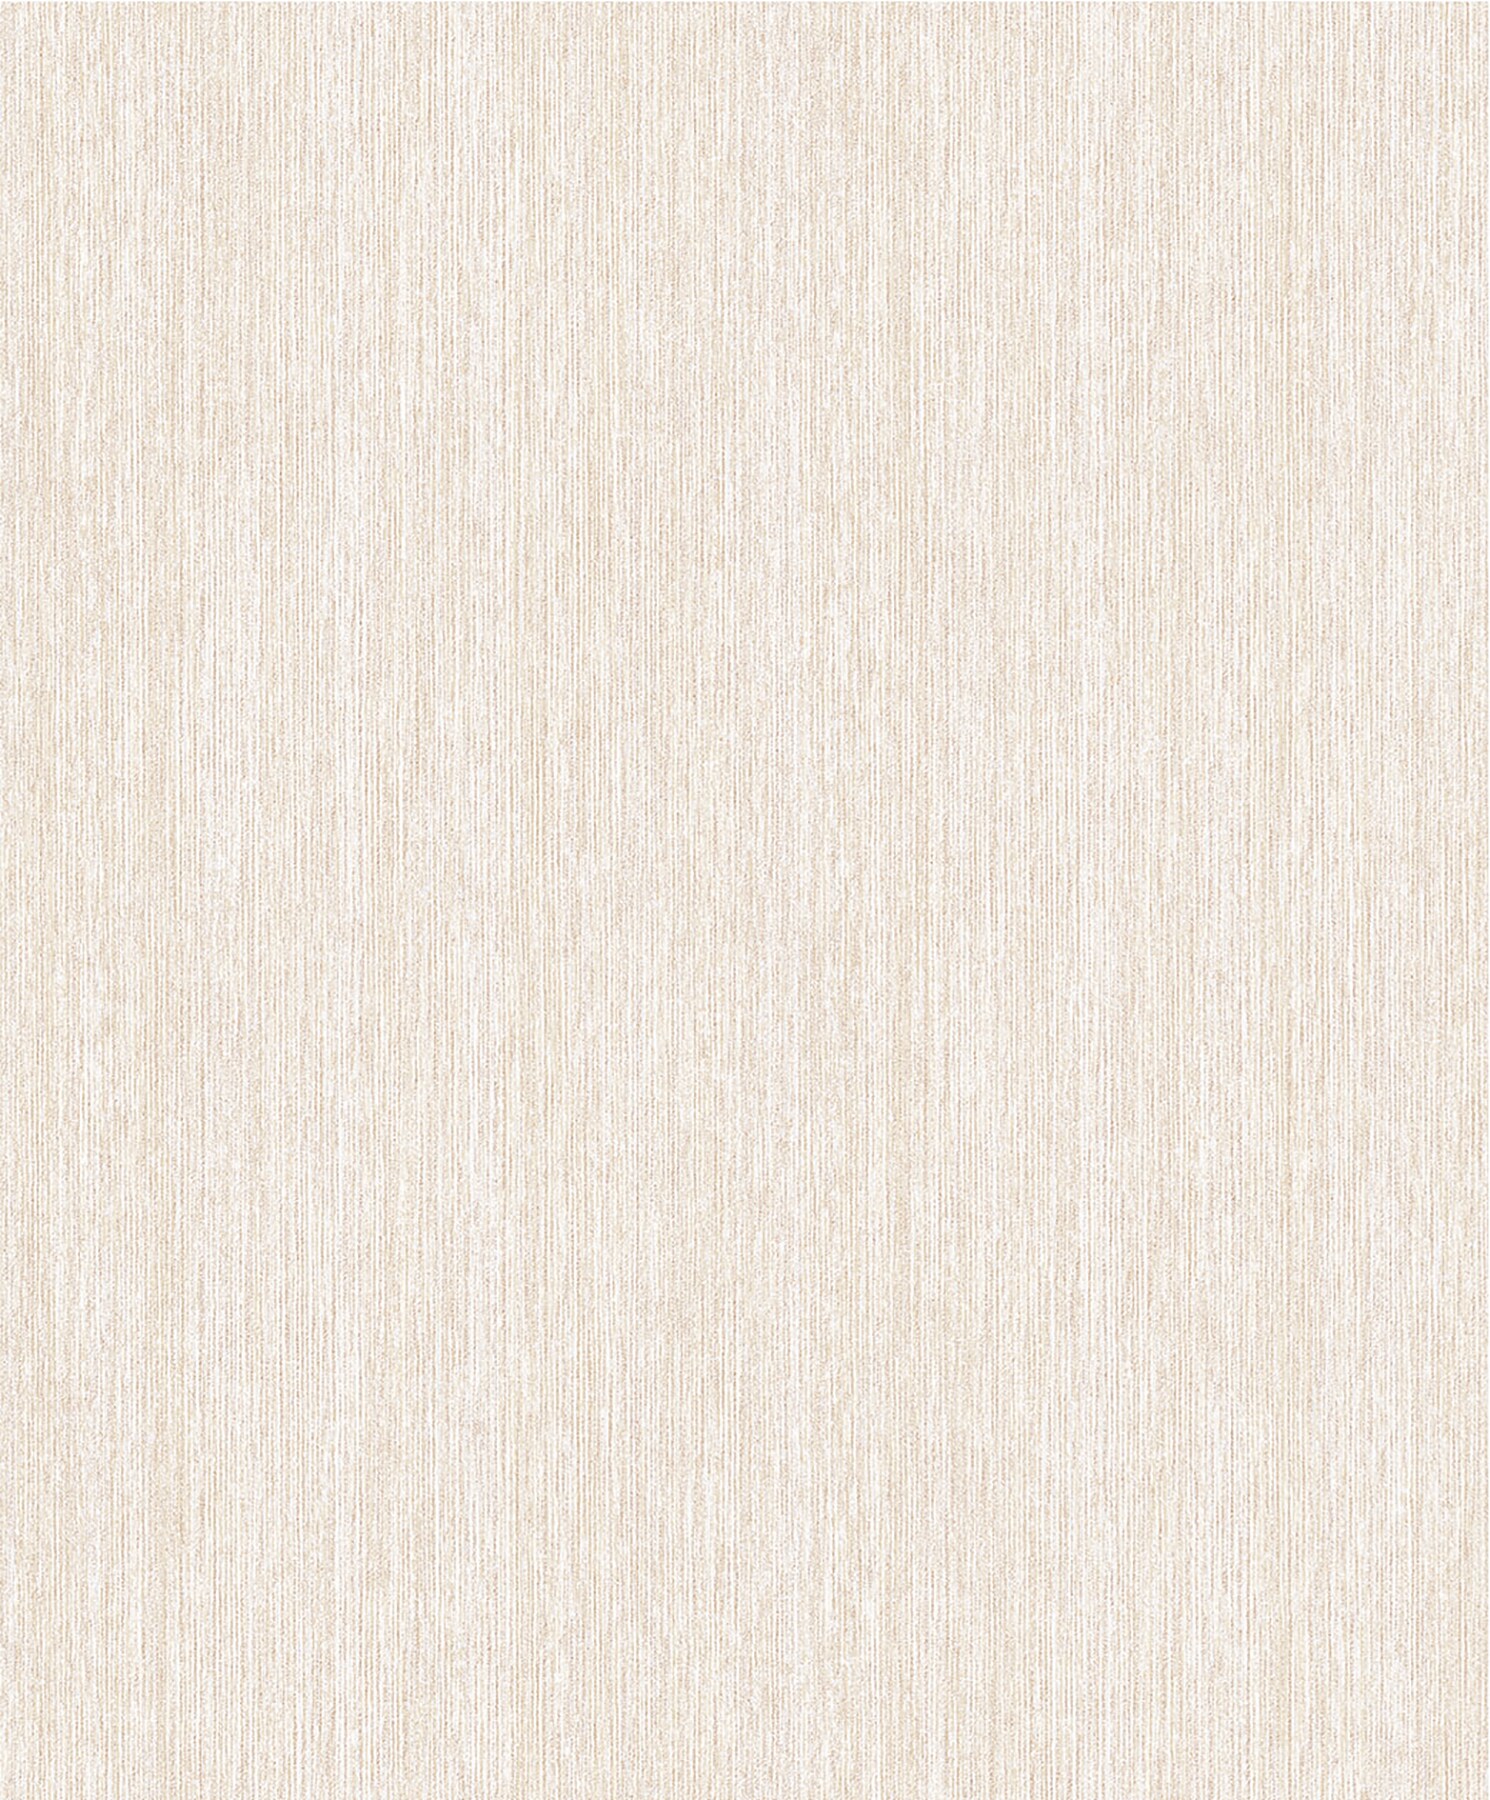 Brewster Riva 57.8-sq ft Cream Non-woven Abstract Unpasted Wallpaper in ...